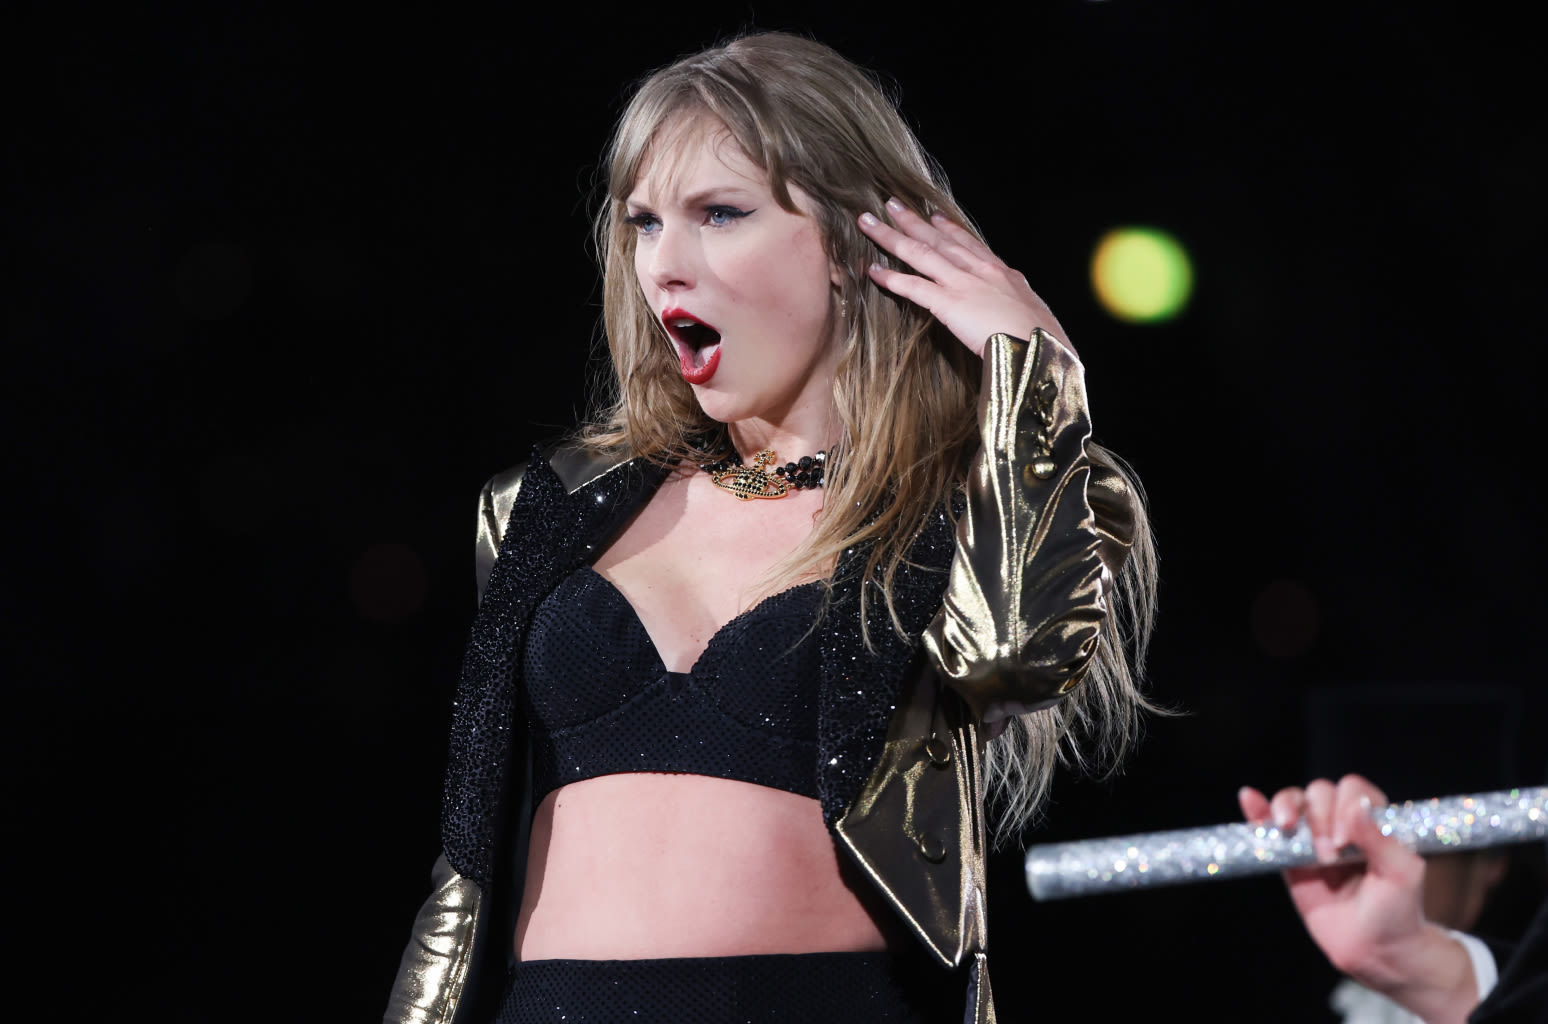 Taylor Swift Pips Kings Of Leon For U.K. Chart Crown